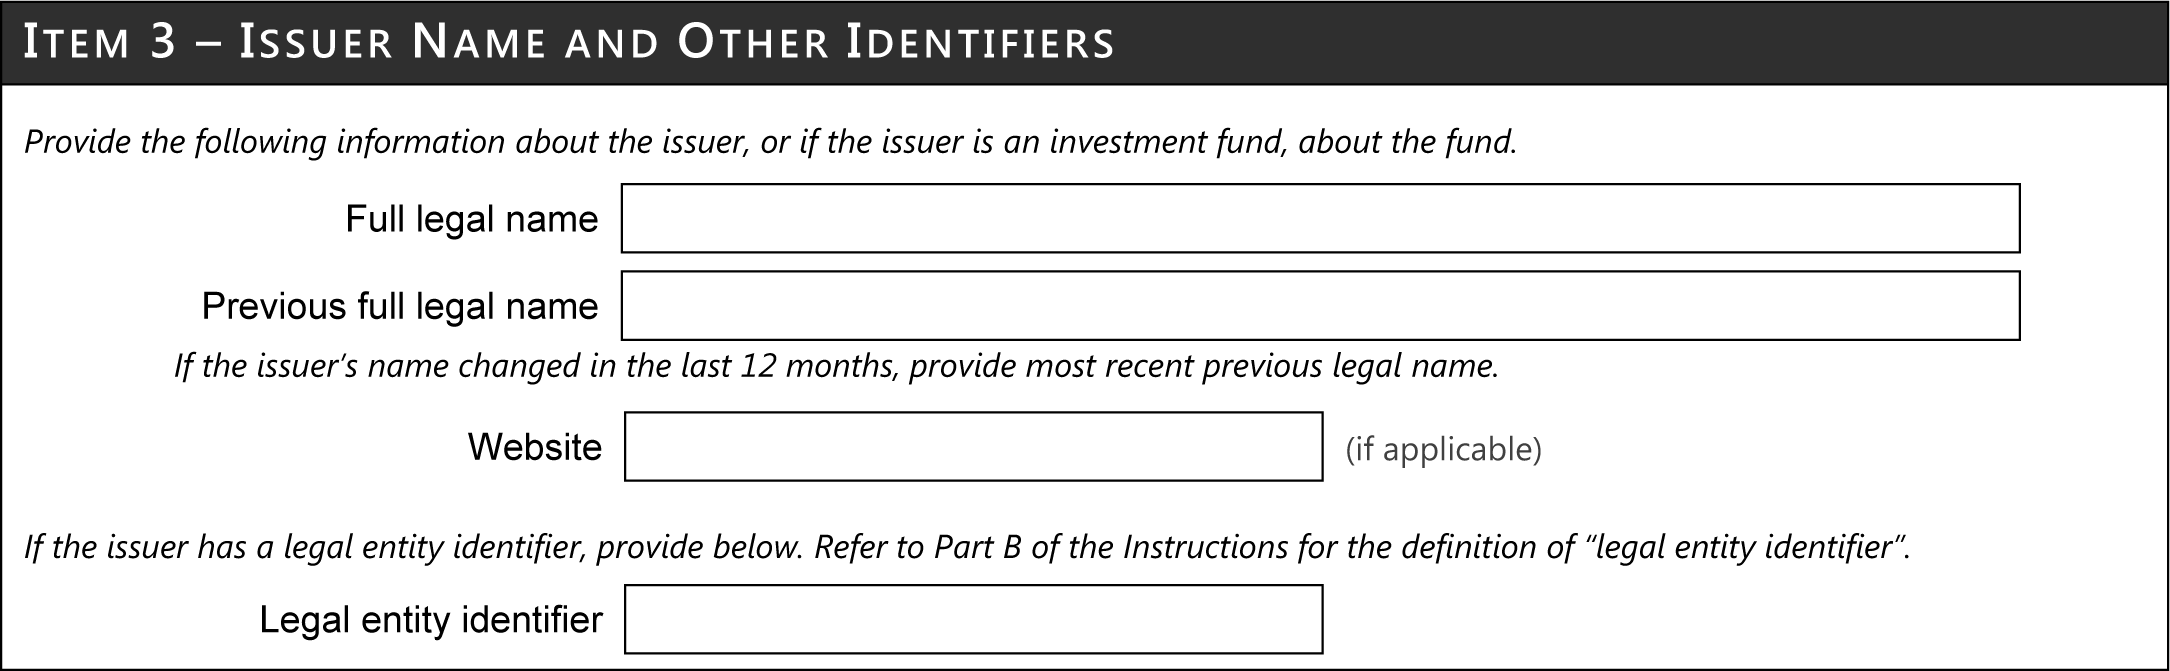 Issuer Name and Other Identifiers